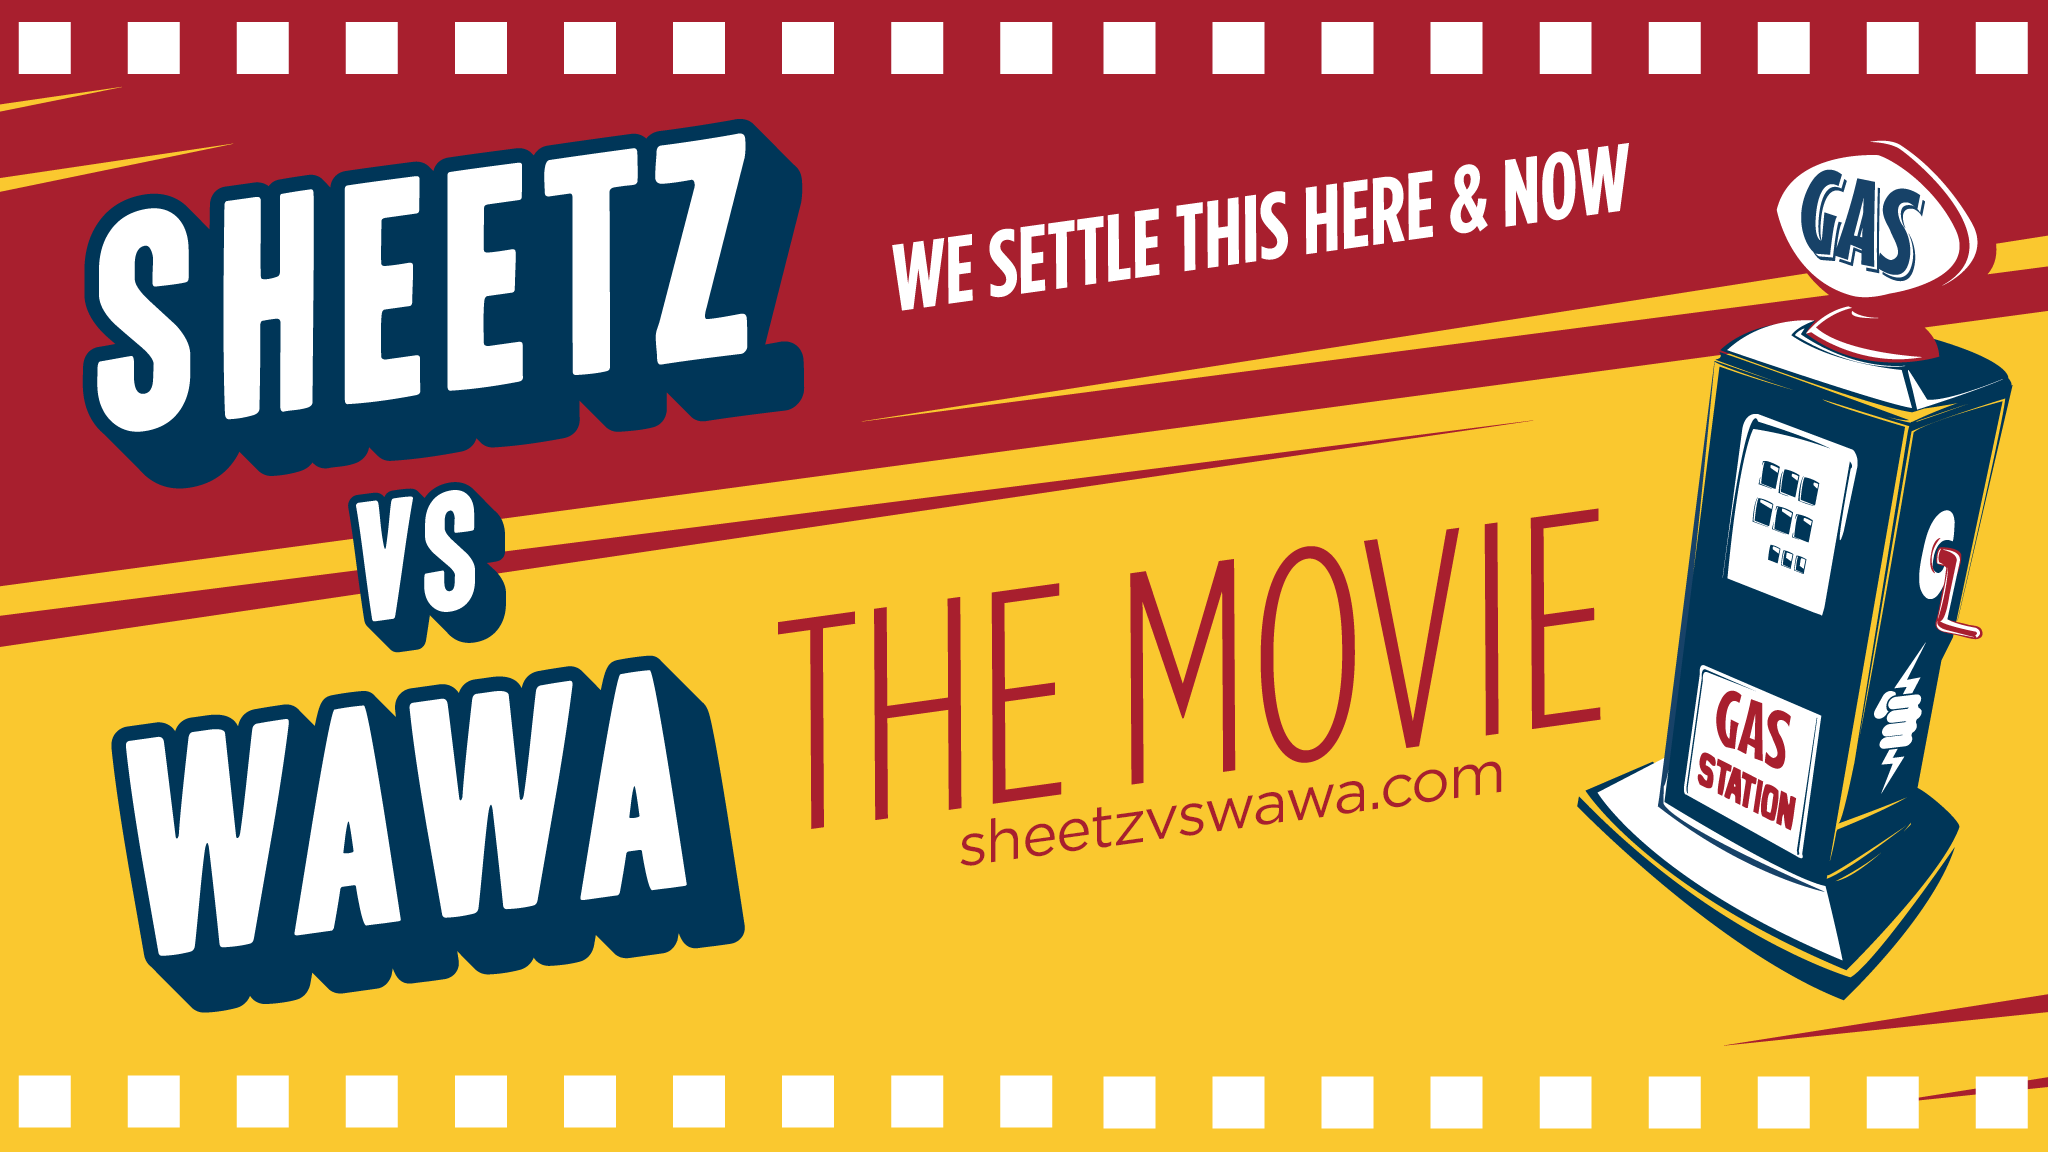 Sheetz Logo - There's a documentary in the works about the Sheetz vs. Wawa rivalry ...